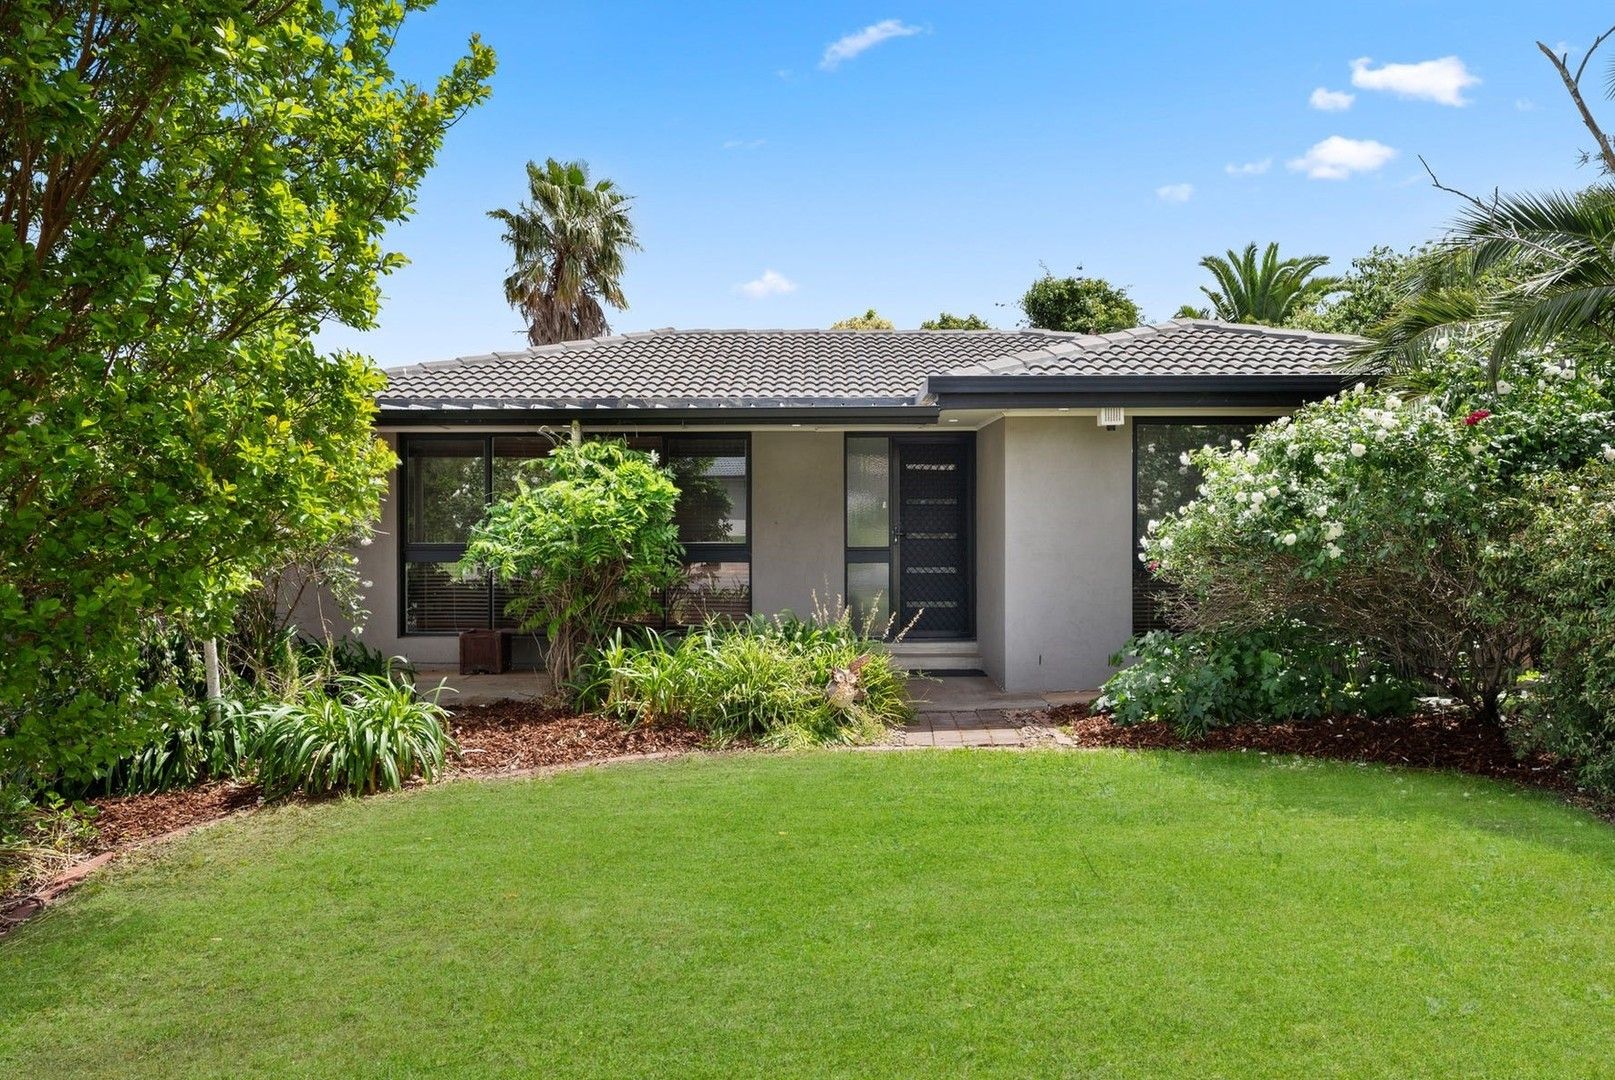 28 Illyarrie Avenue, Surrey Downs SA 5126, Image 0